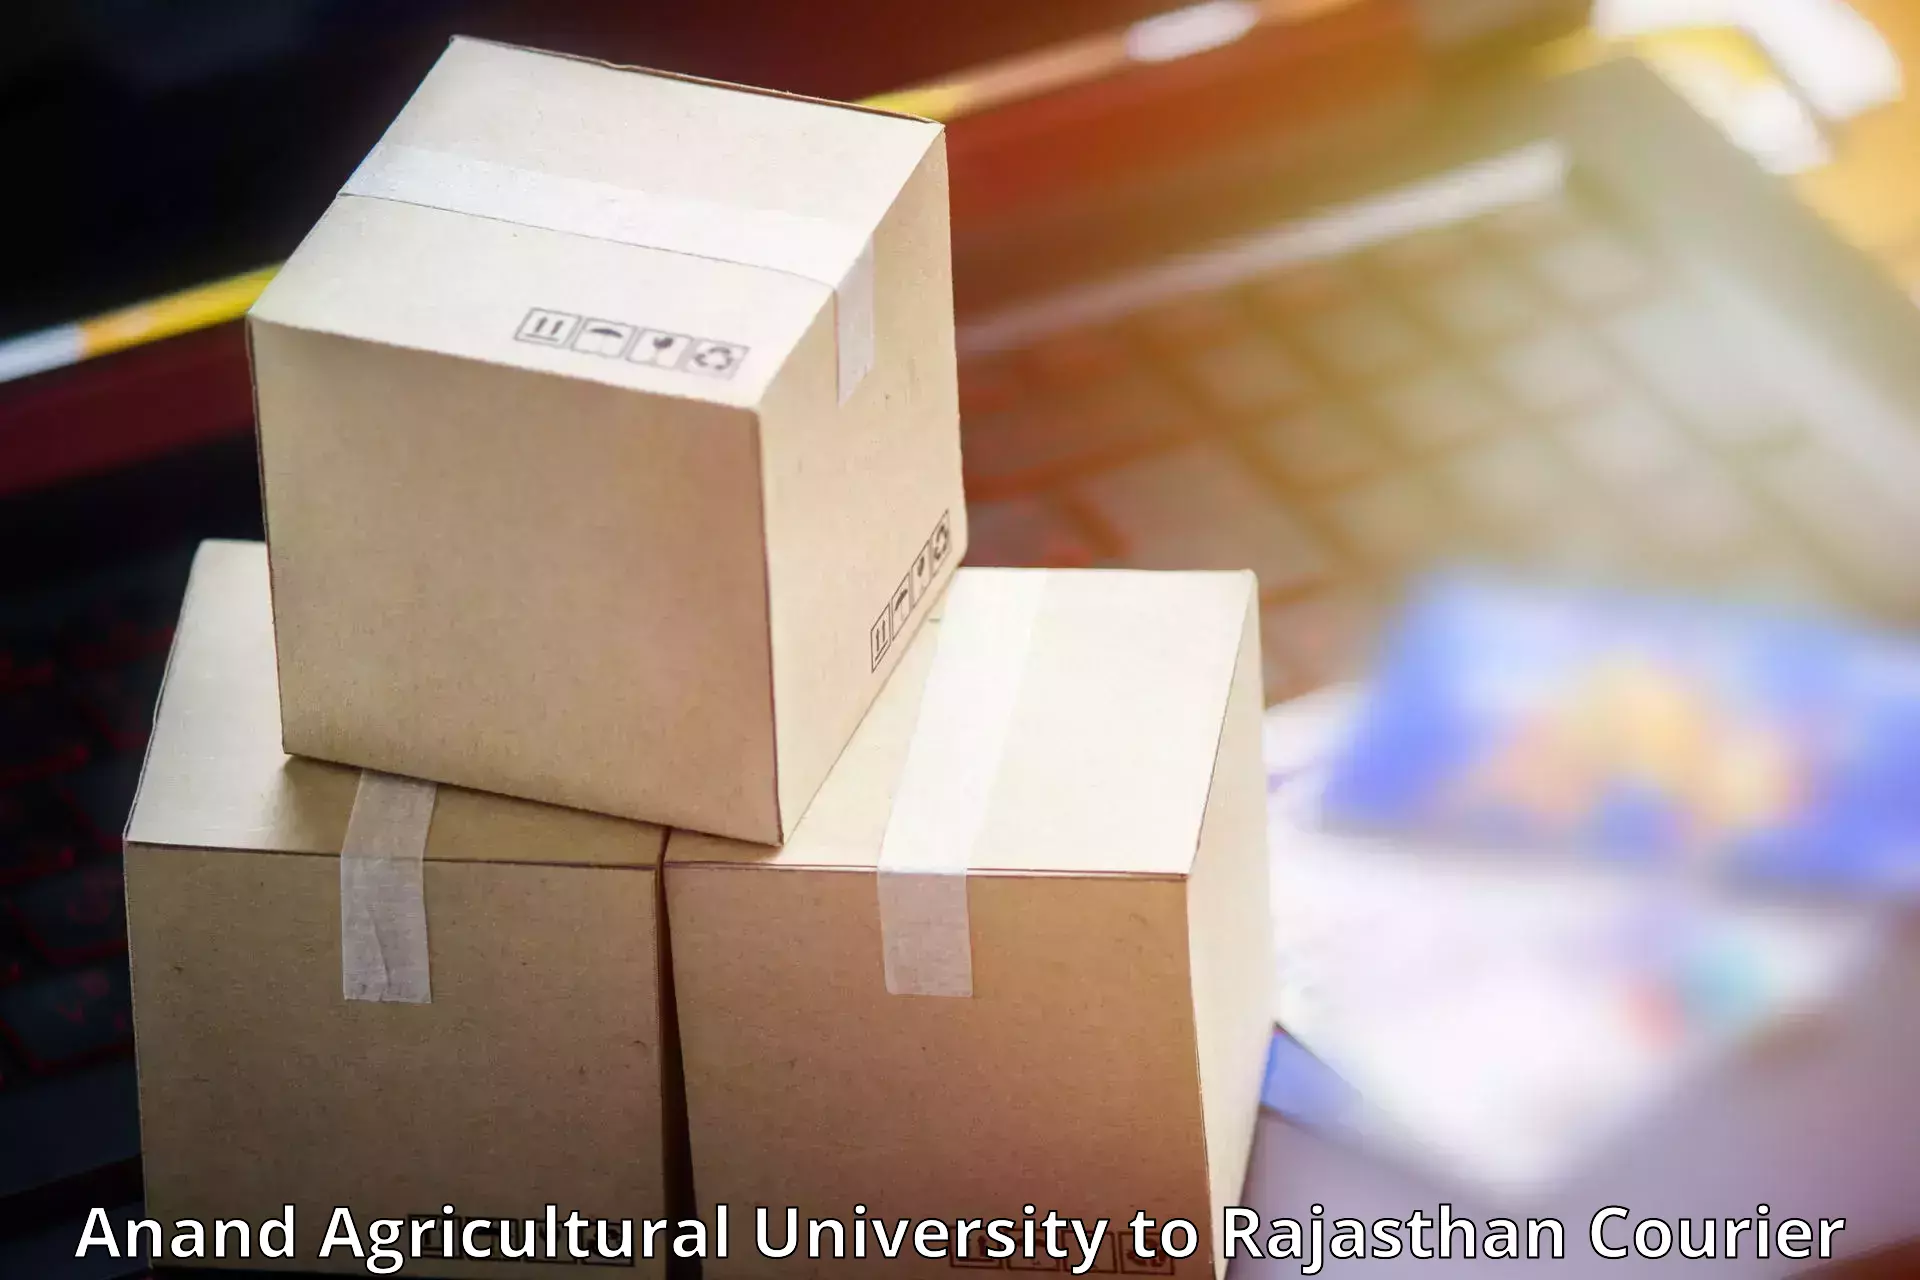 Dynamic courier services Anand Agricultural University to Bikaner